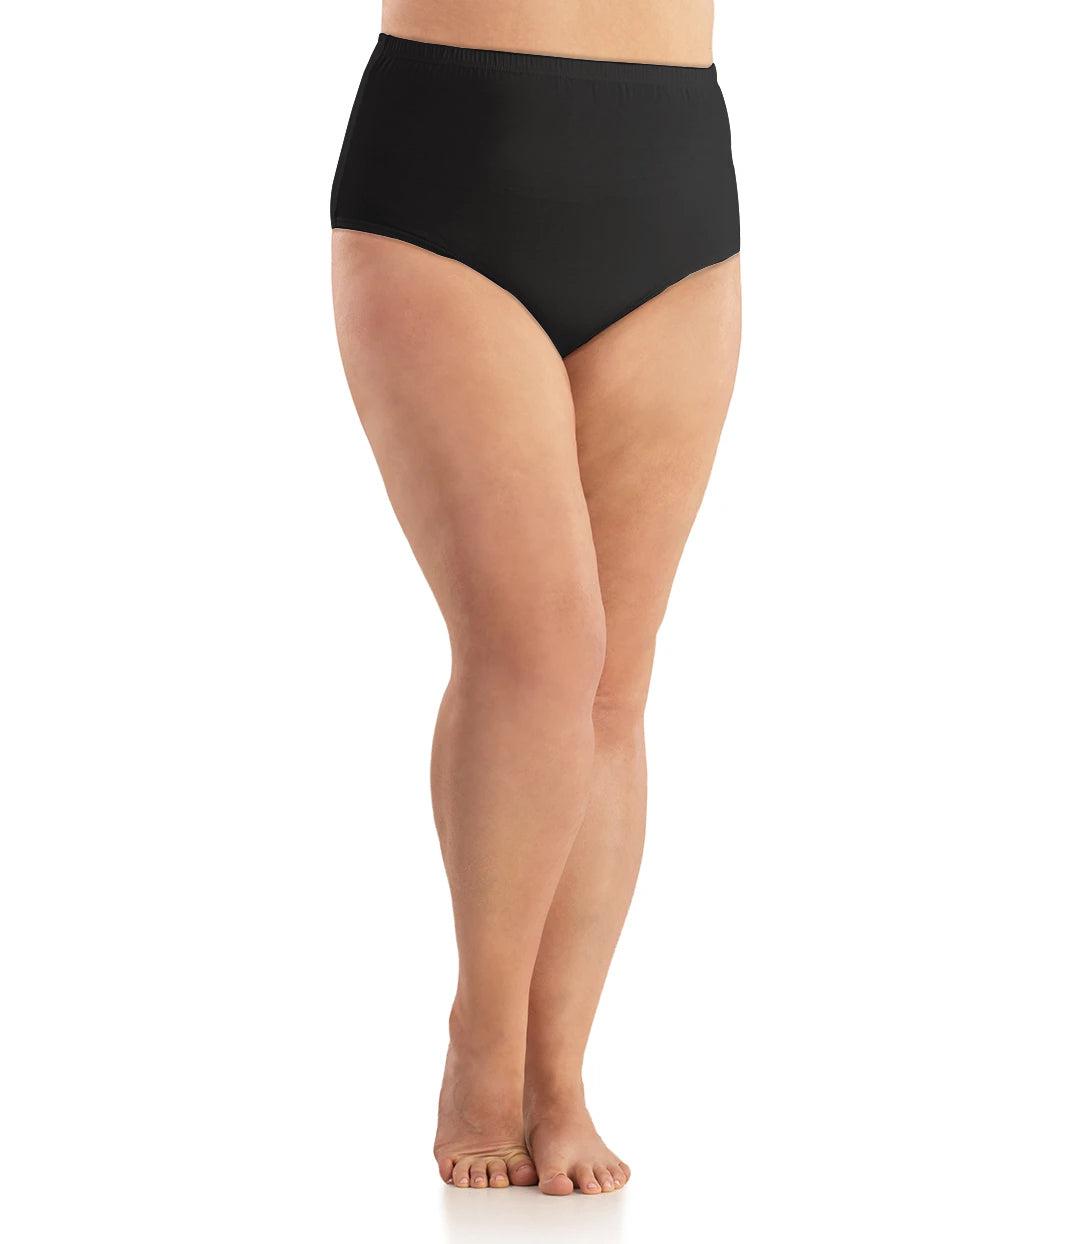 Bottom half of plus sized woman, facing front, wearing JunoActive Junowear Cotton Stretch Classic Full Fit Brief in black. This brief has a high waist fit with conservative leg opening.